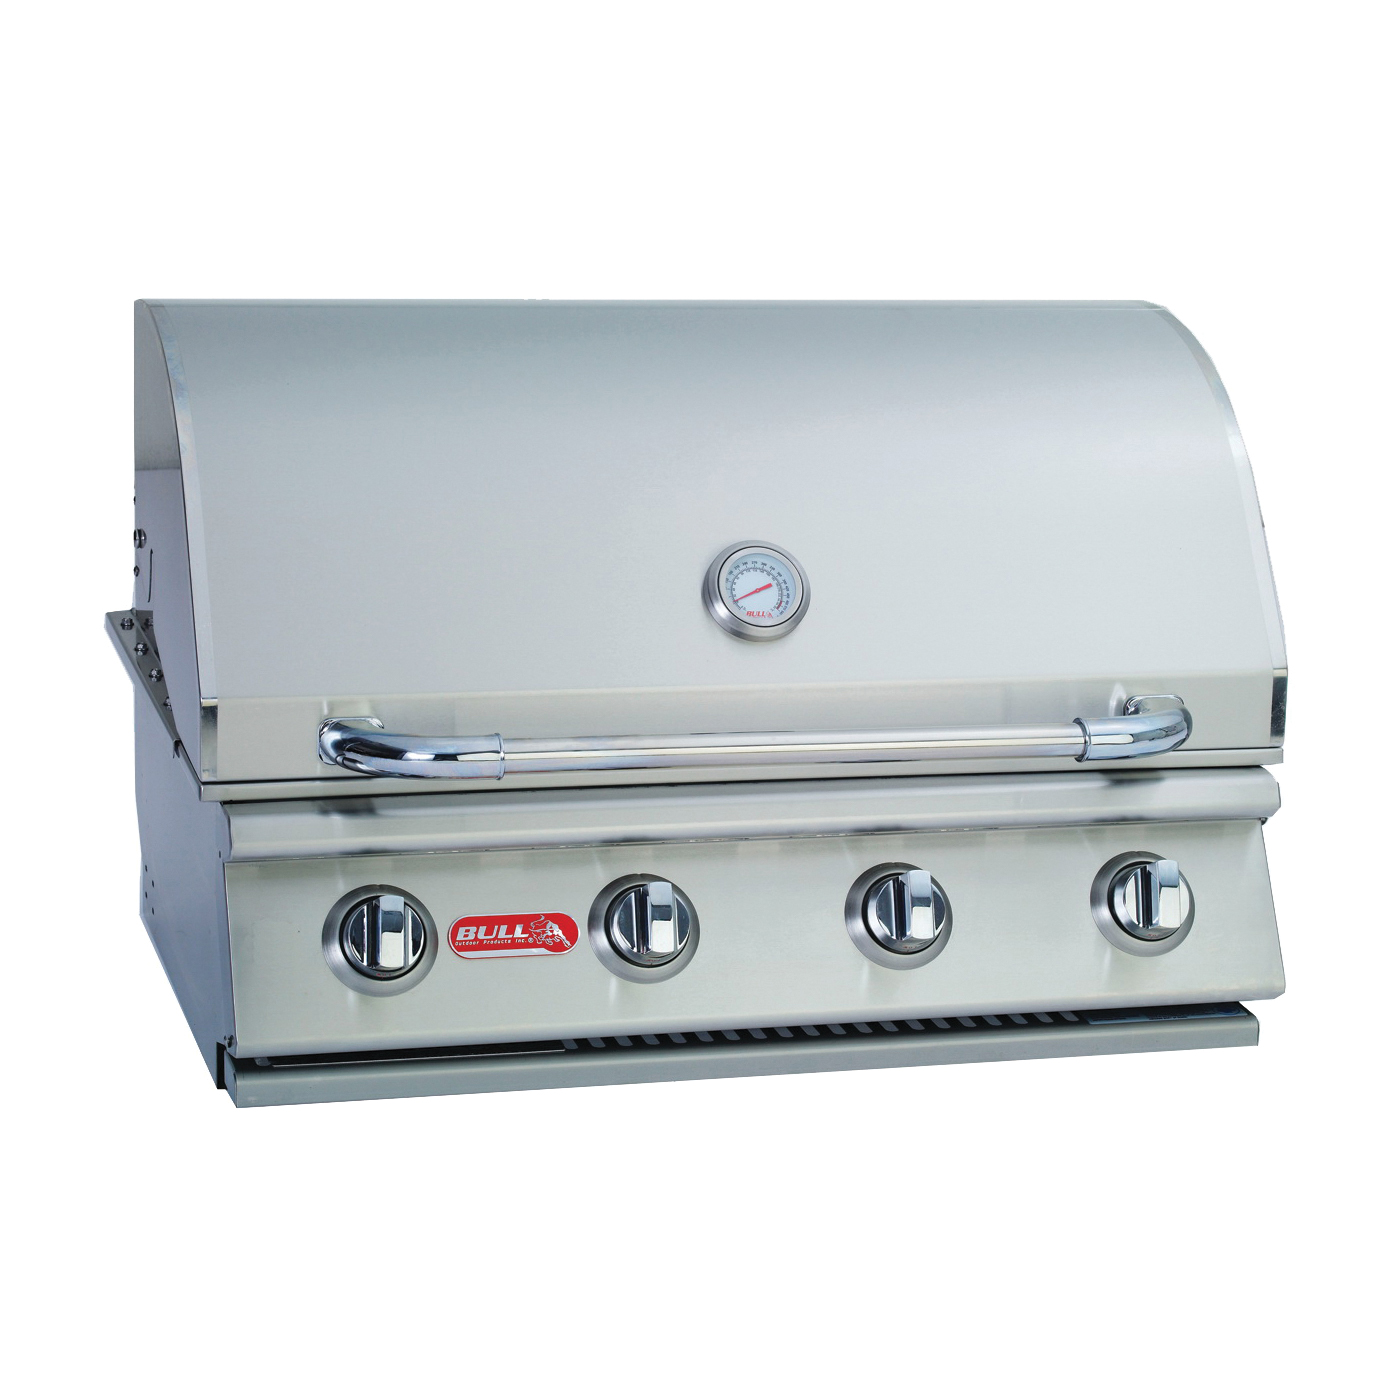 Outlaw 26038 Gas Grill Head, 60000 Btu, LP, 4-Burner, 210 sq-in Secondary Cooking Surface